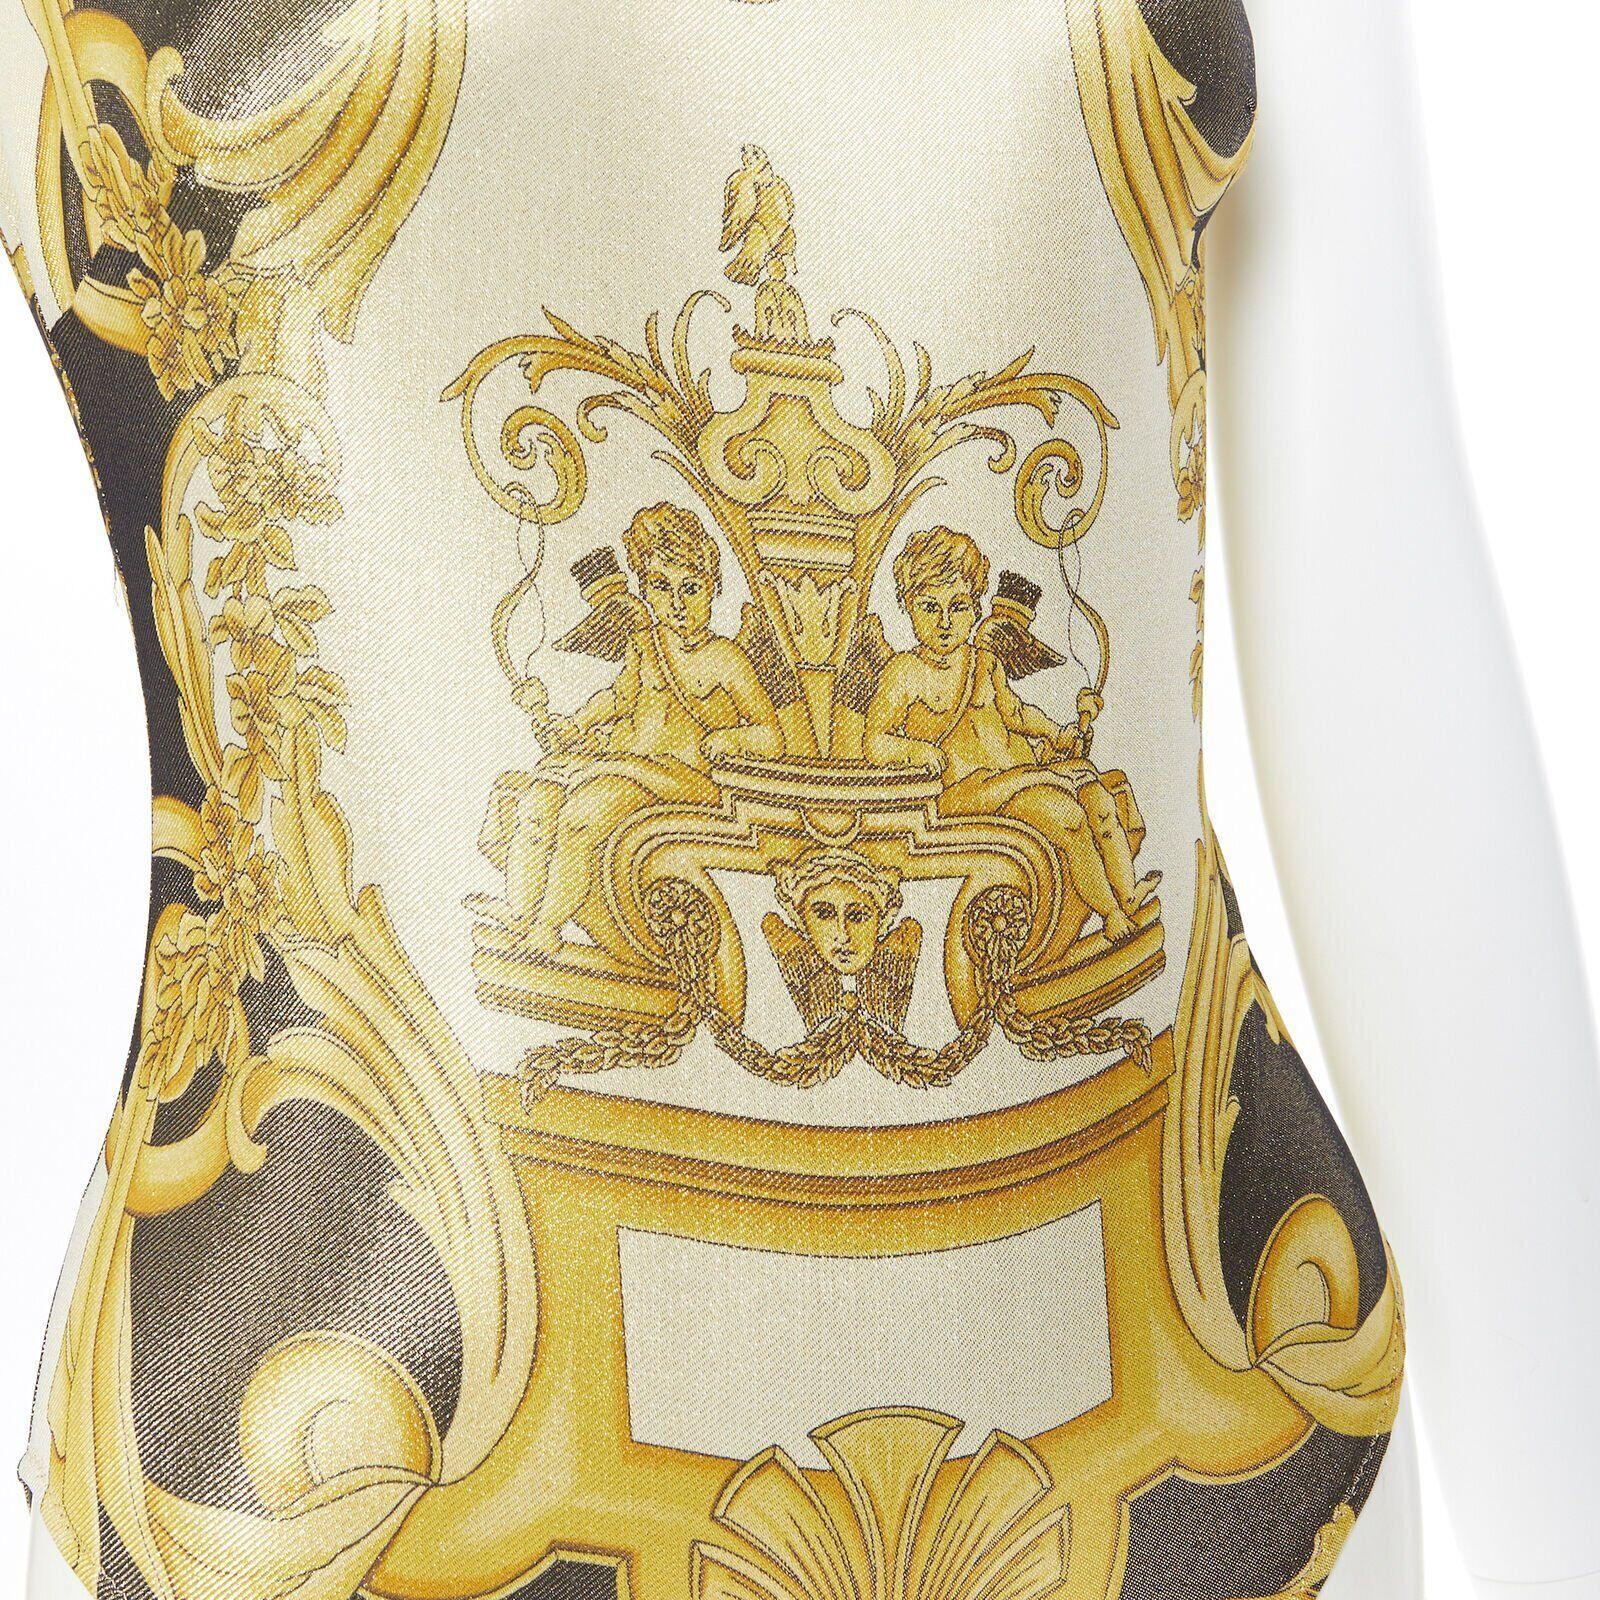 new VERSACE Tribute SS18 Runway Baroque Cherub gold black lurex bodysuit IT38 XS
Reference: TGAS/A05342
Brand: Versace
Designer: Donatella Versace
Model: Bodysuit top
Collection: Spring Summer 2018 - Runway
Material: Polyamide, Blend
Color: Gold,